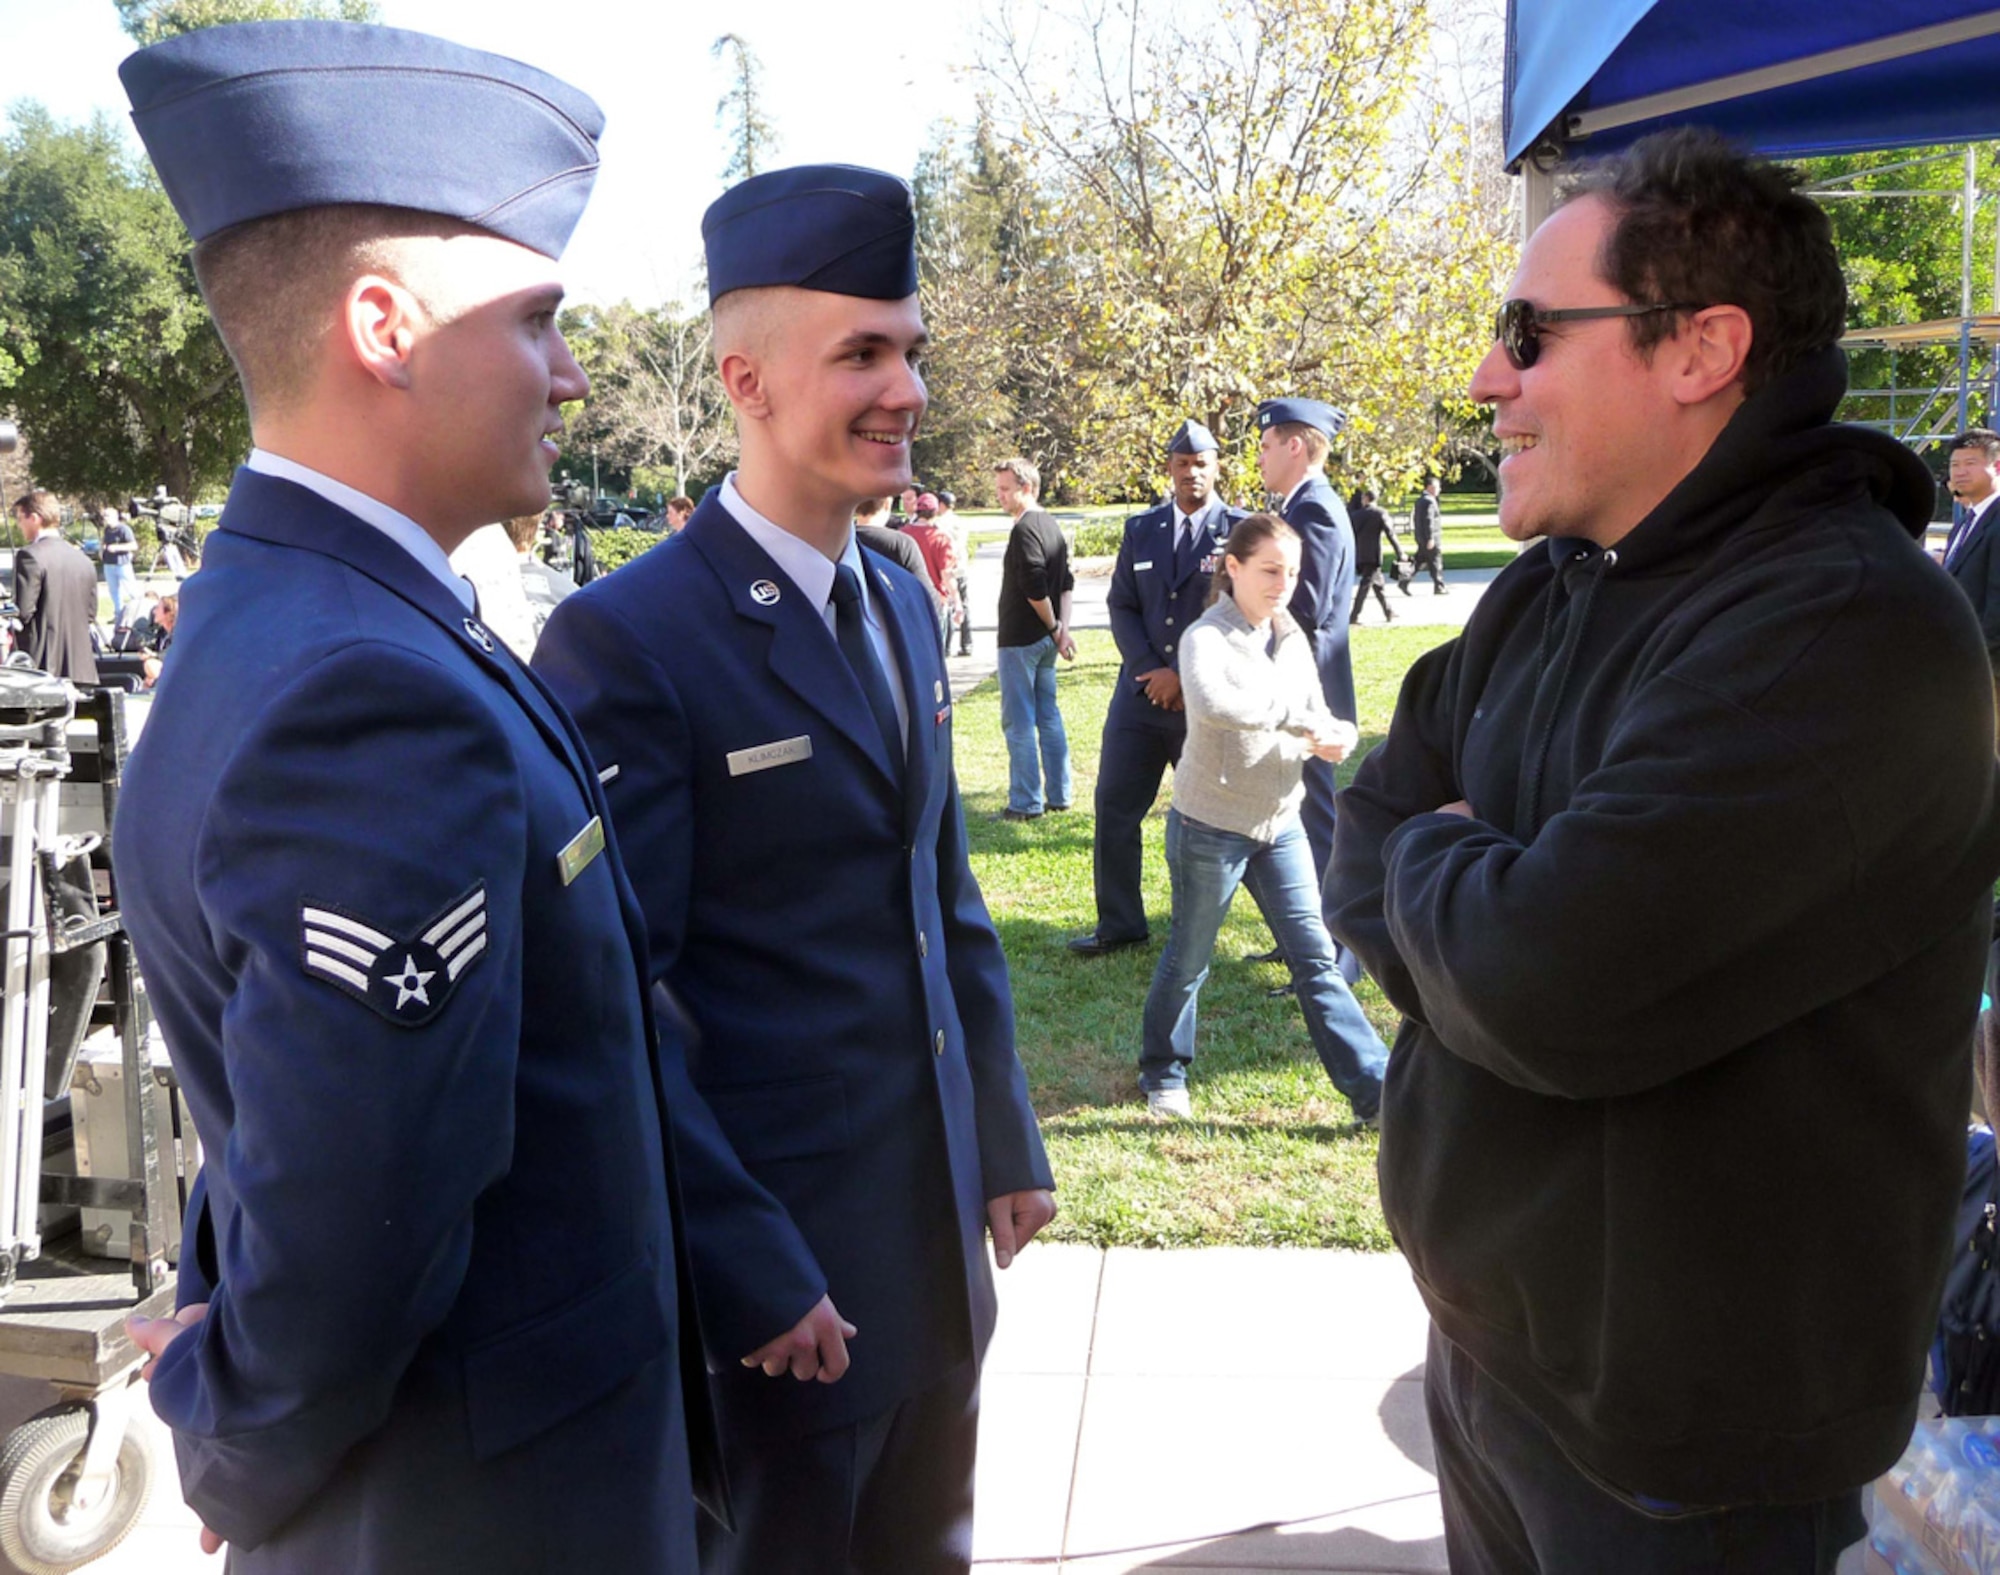 Iron Man 2 Director Jon Favreau talks to Airmen from Los Angeles AFB during a break in filming. More than 20 people from the base were featured as extras in a scene where Robert Downey Jr’s Tony Stark character and Don Cheadle’s Lt. Col. James “Rhodey” Rhodes character receive medals. (Air Force Entertainment Courtesy Photo) 